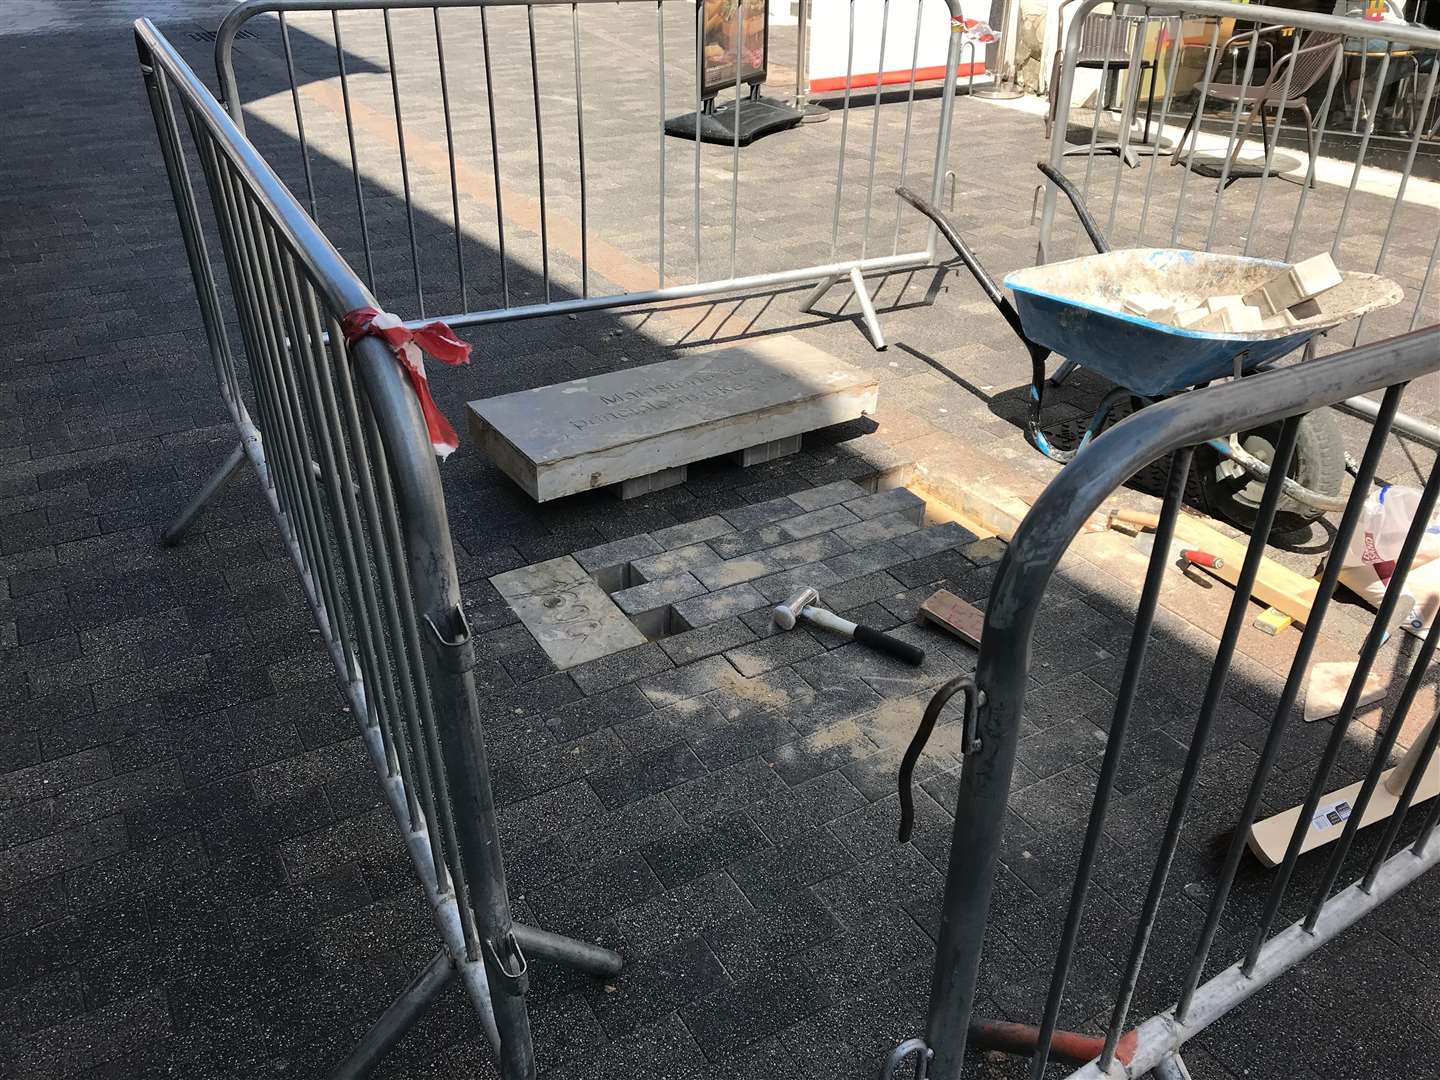 The offending slab has been removed today